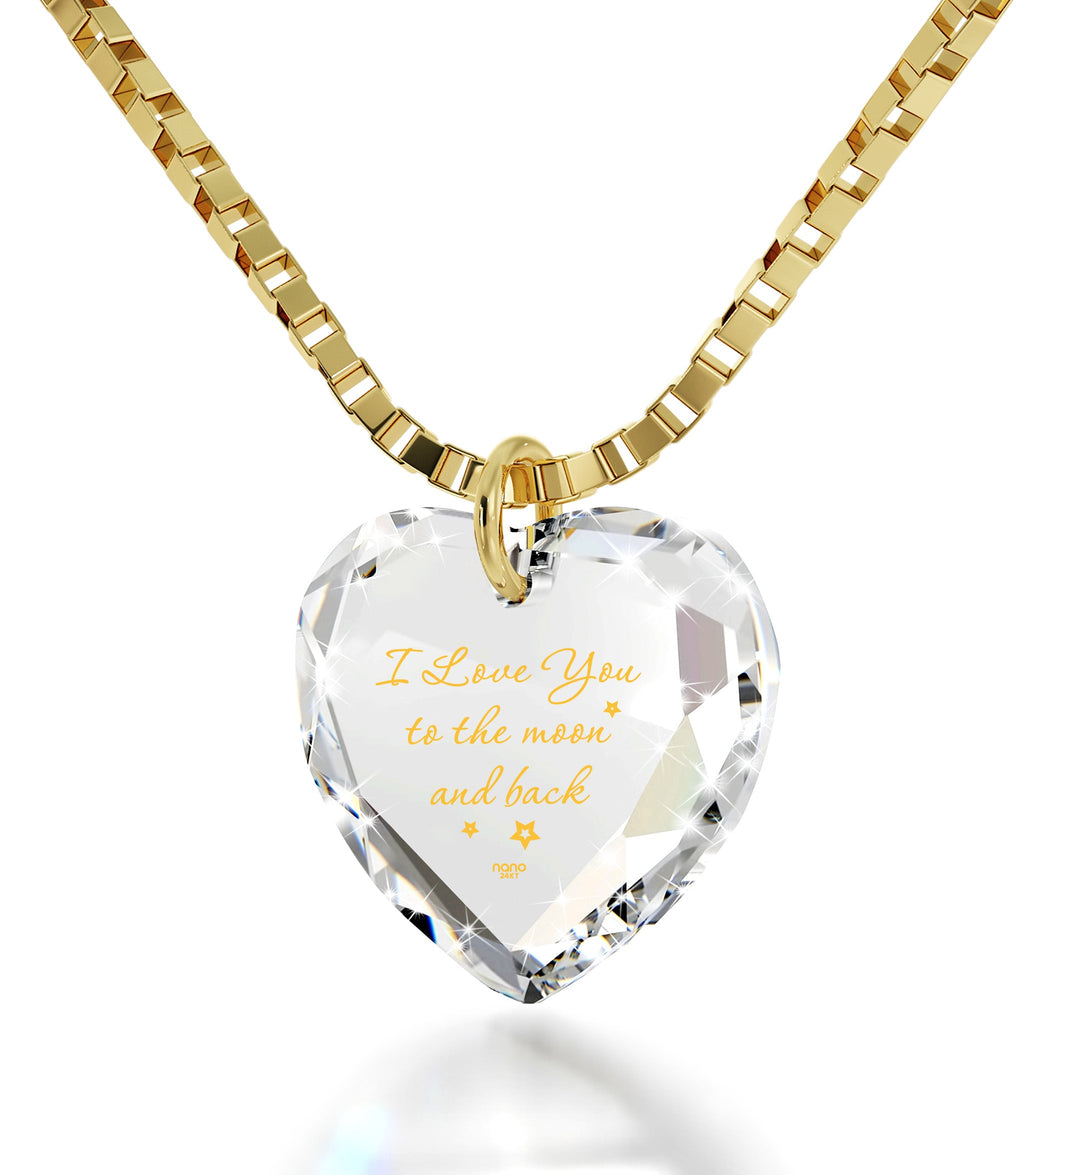 Tiny Crystal Heart pendant 24k Gold Inscribed I Love You to the Moon and Back Necklace